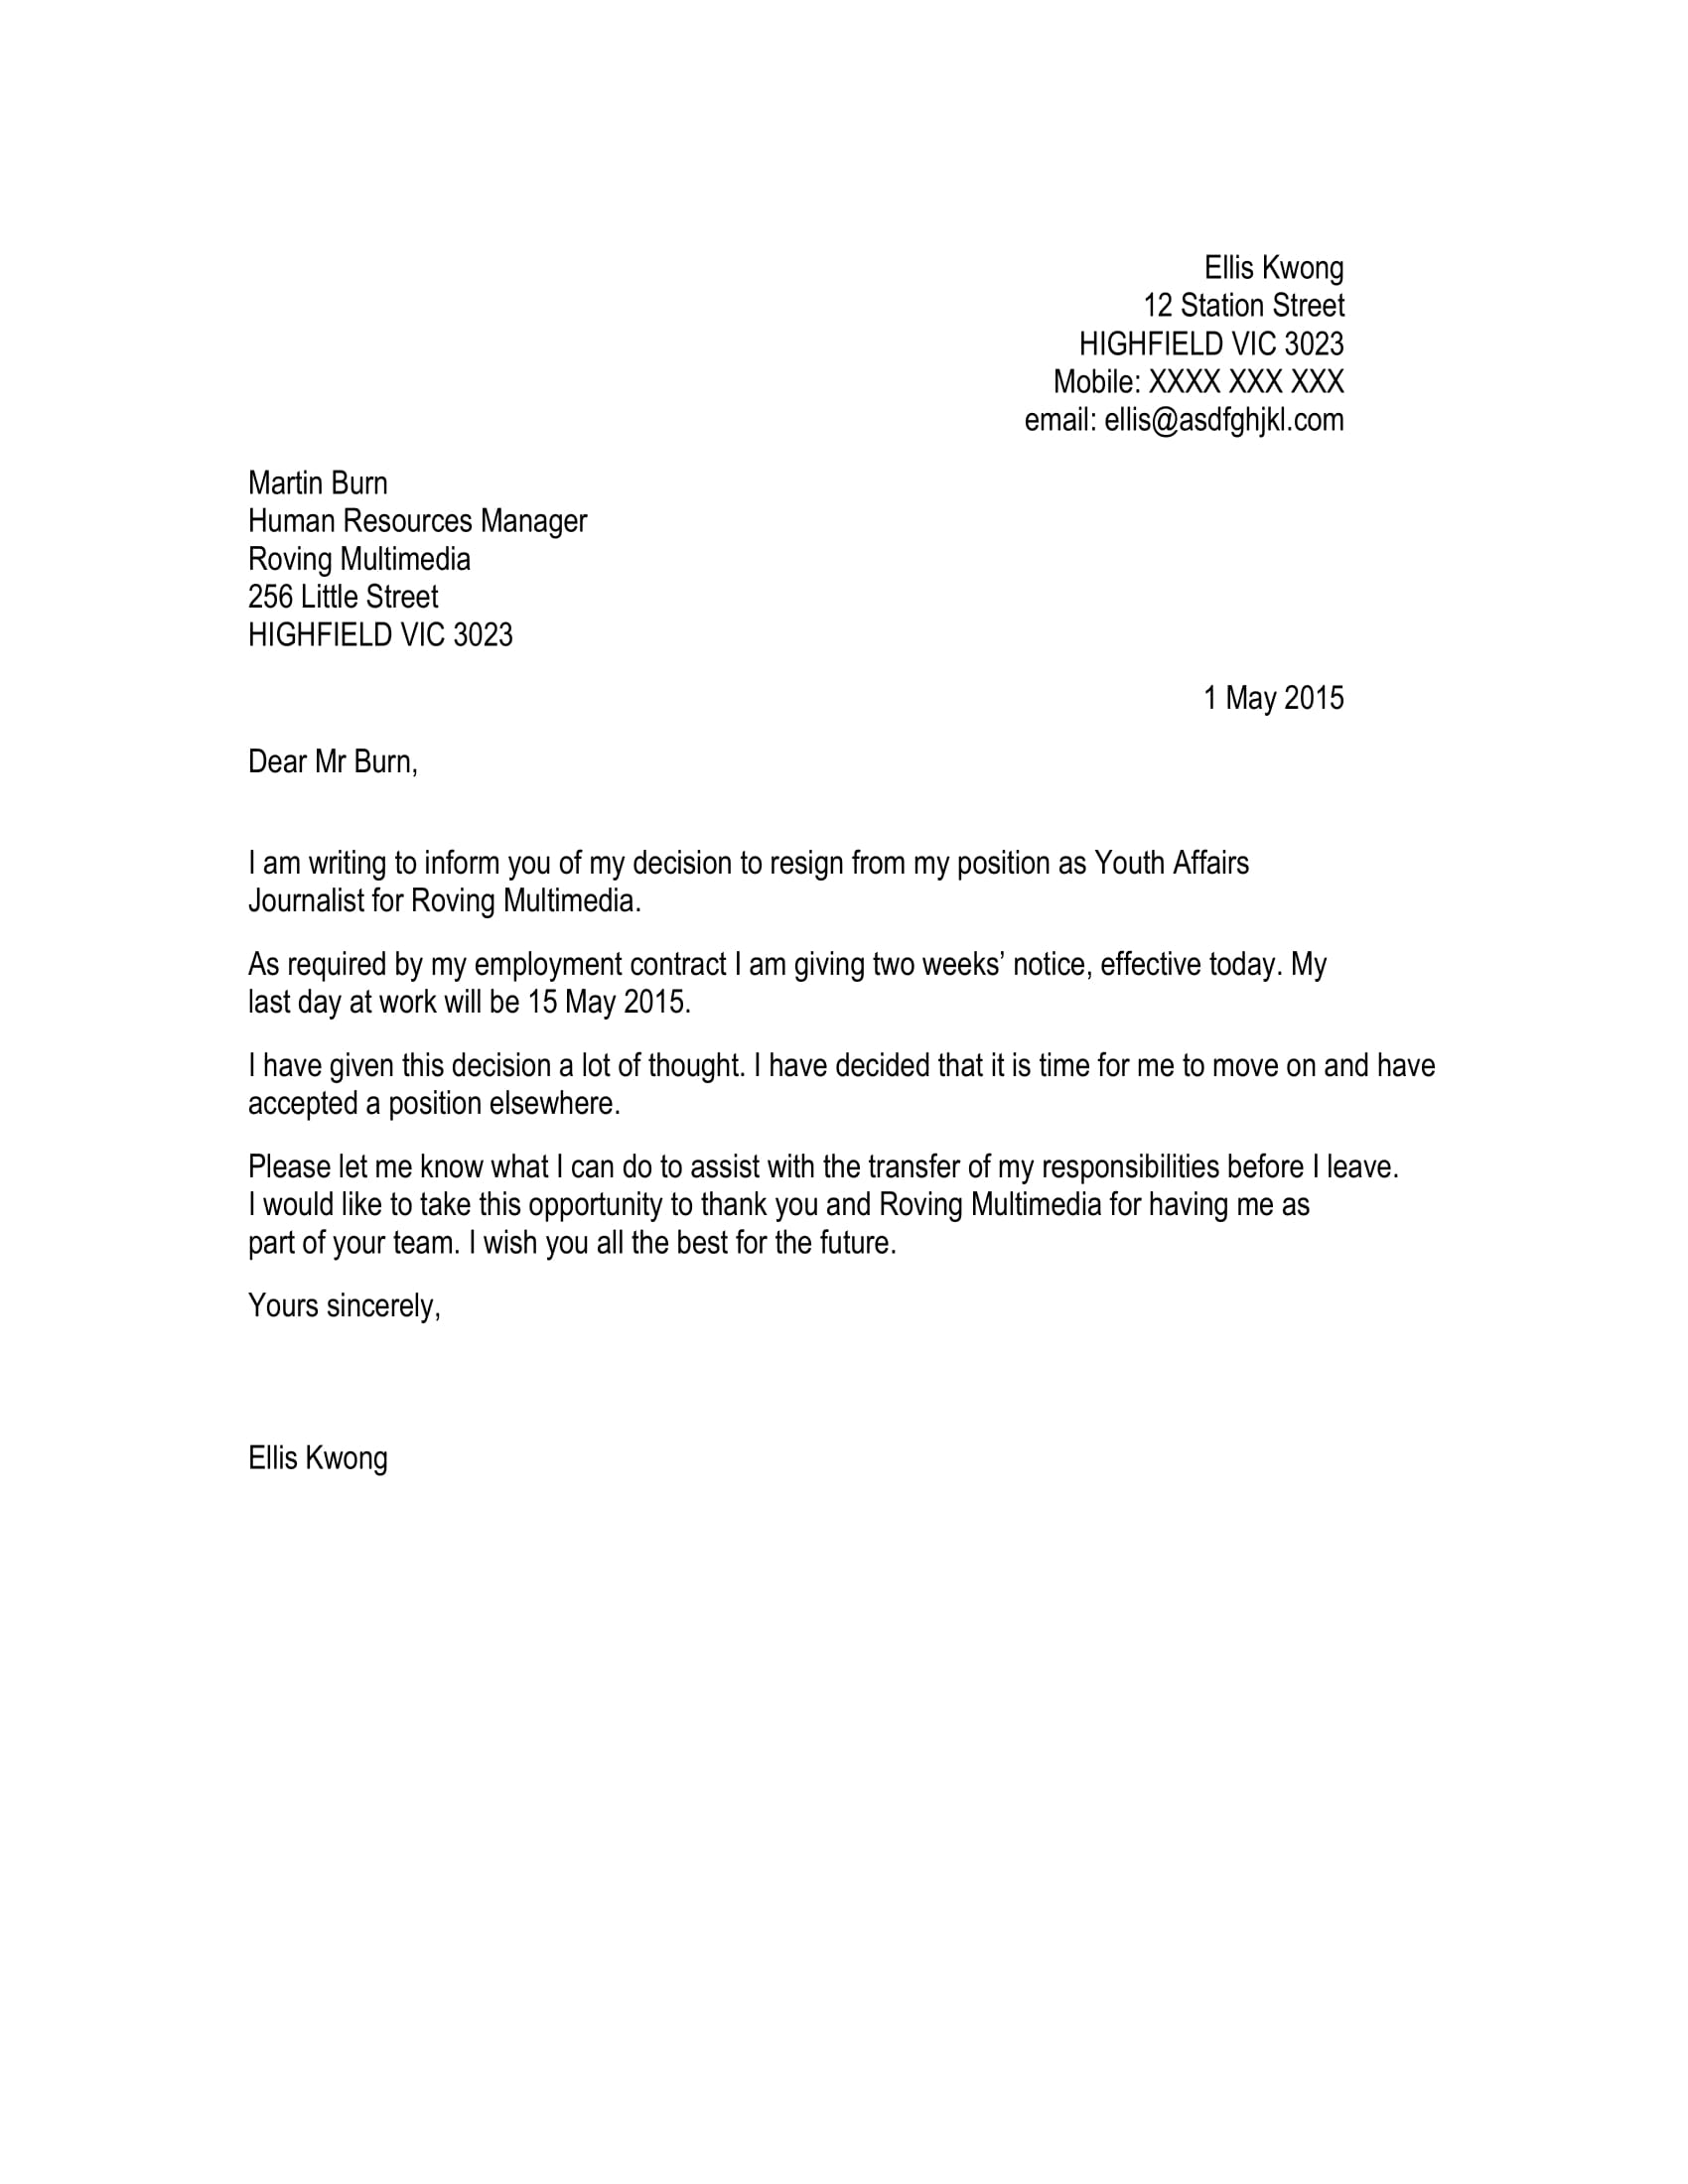 youth affairs journalist resignation letter examples